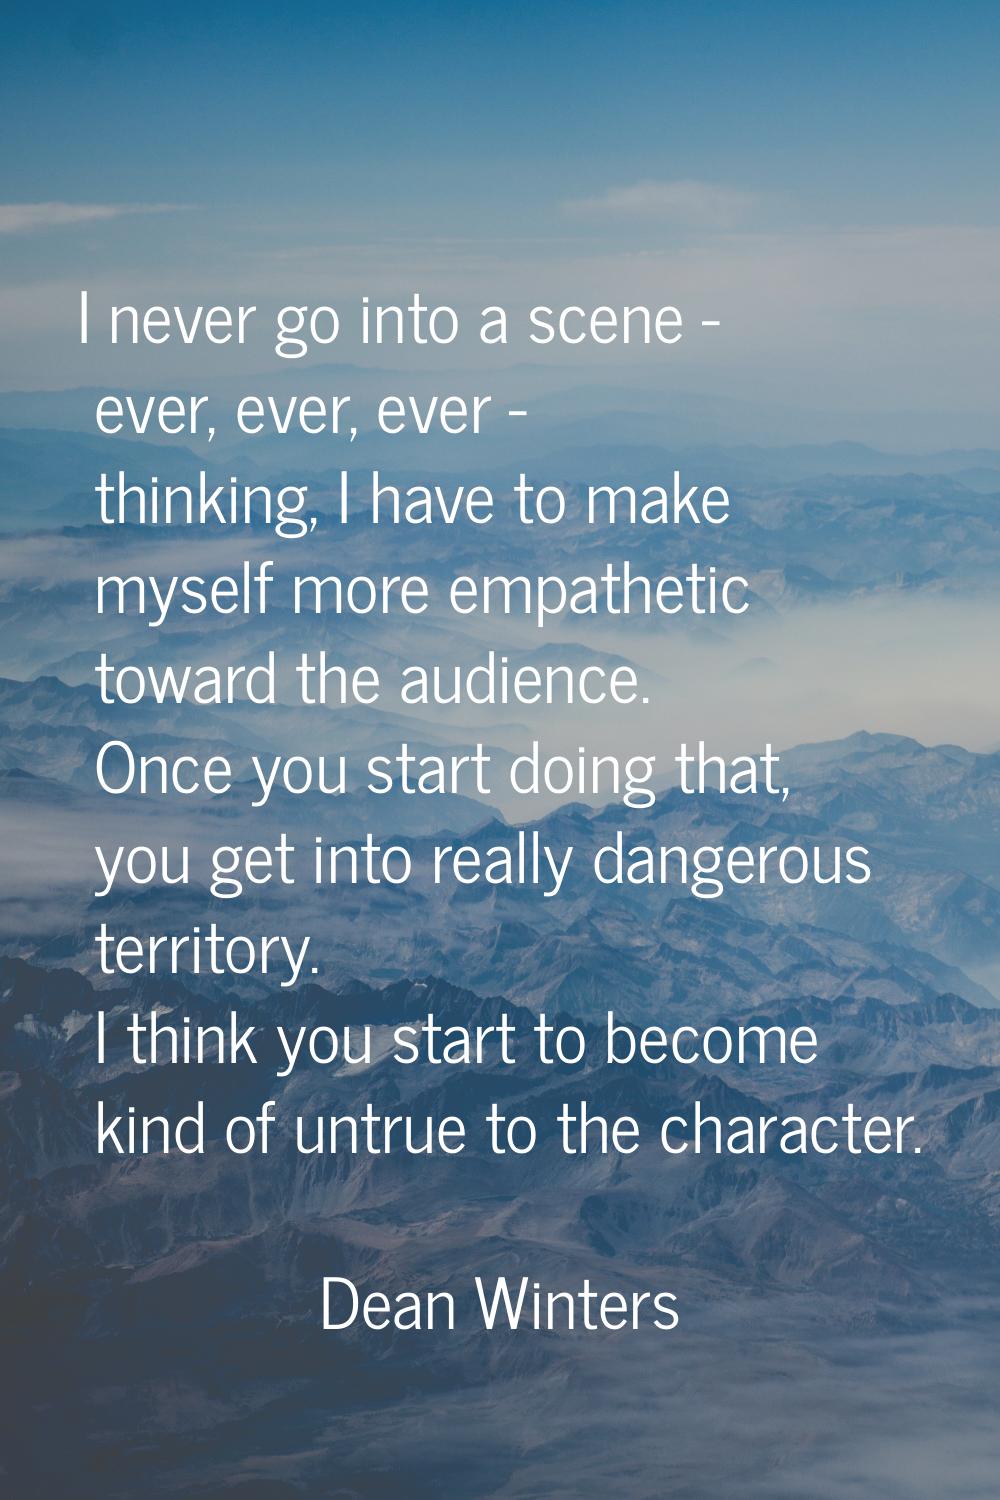 I never go into a scene - ever, ever, ever - thinking, I have to make myself more empathetic toward